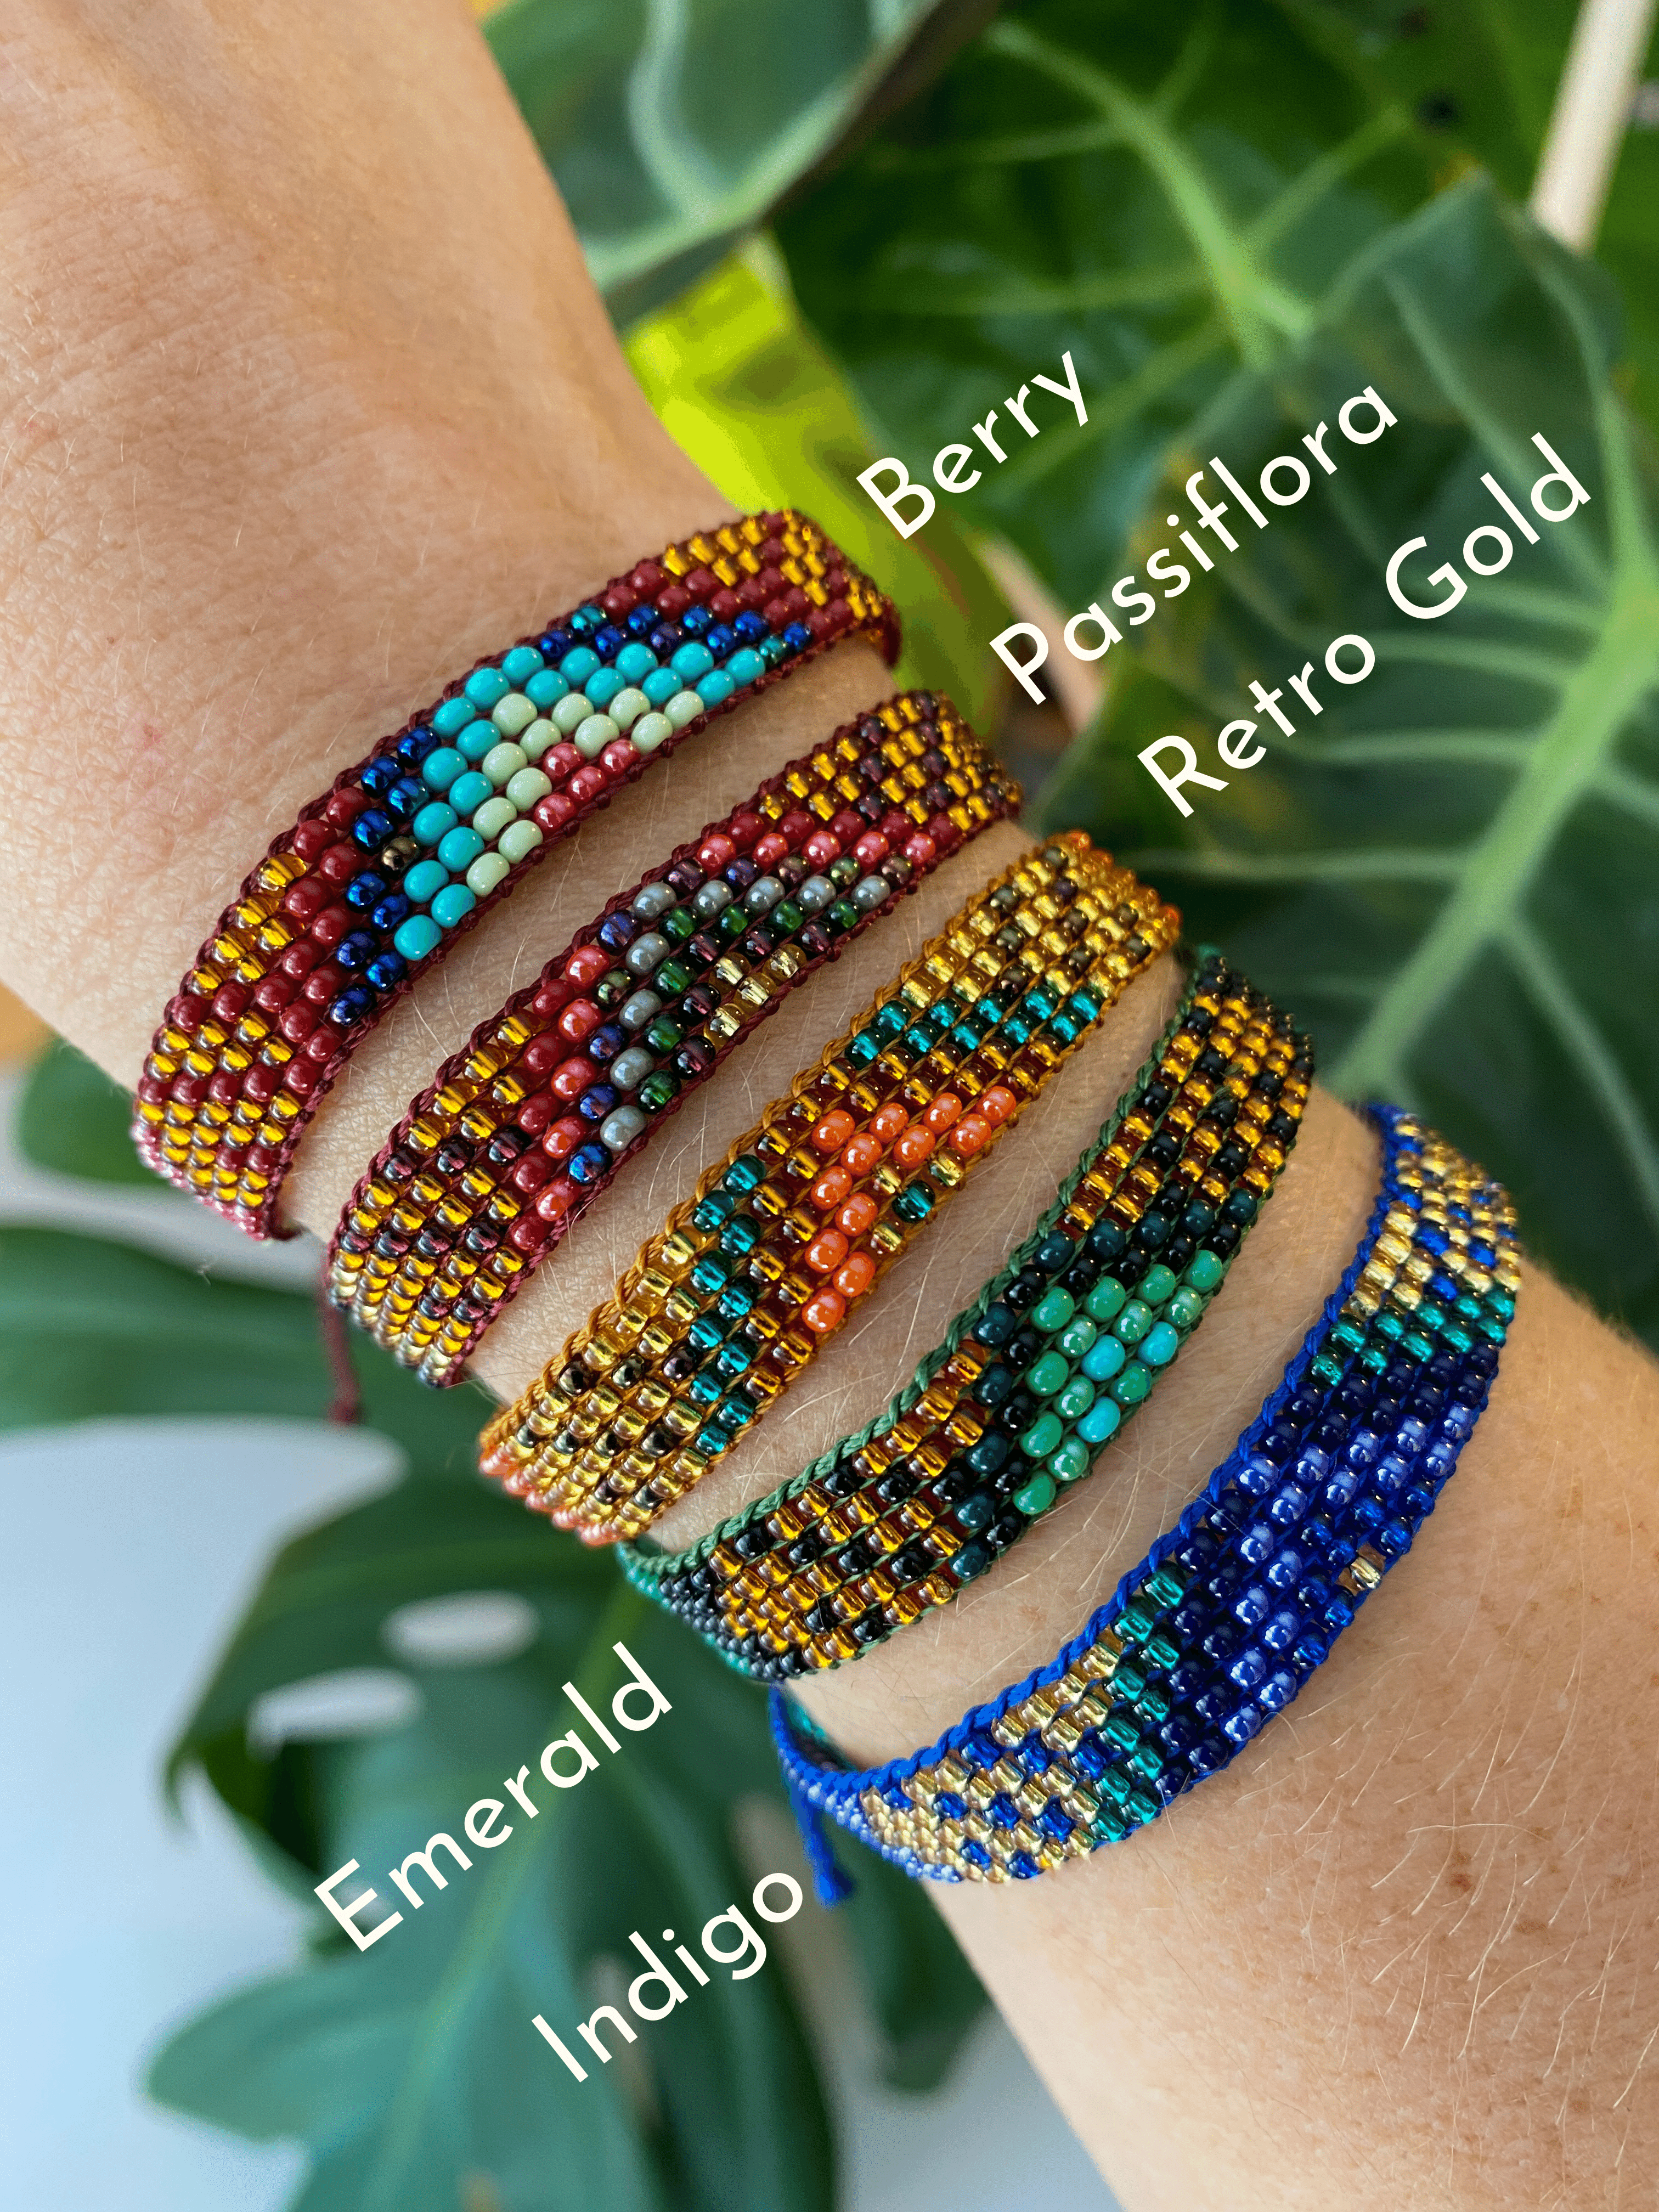 HandPicked, Inc. - Summer fun Cedar Berry Bracelets in stock! One for you  and one for a friend! Stop by to get your favorite new colors!  https://behandpicked.com/cedar-berry-bracelet-hp-best-seller/ | Facebook